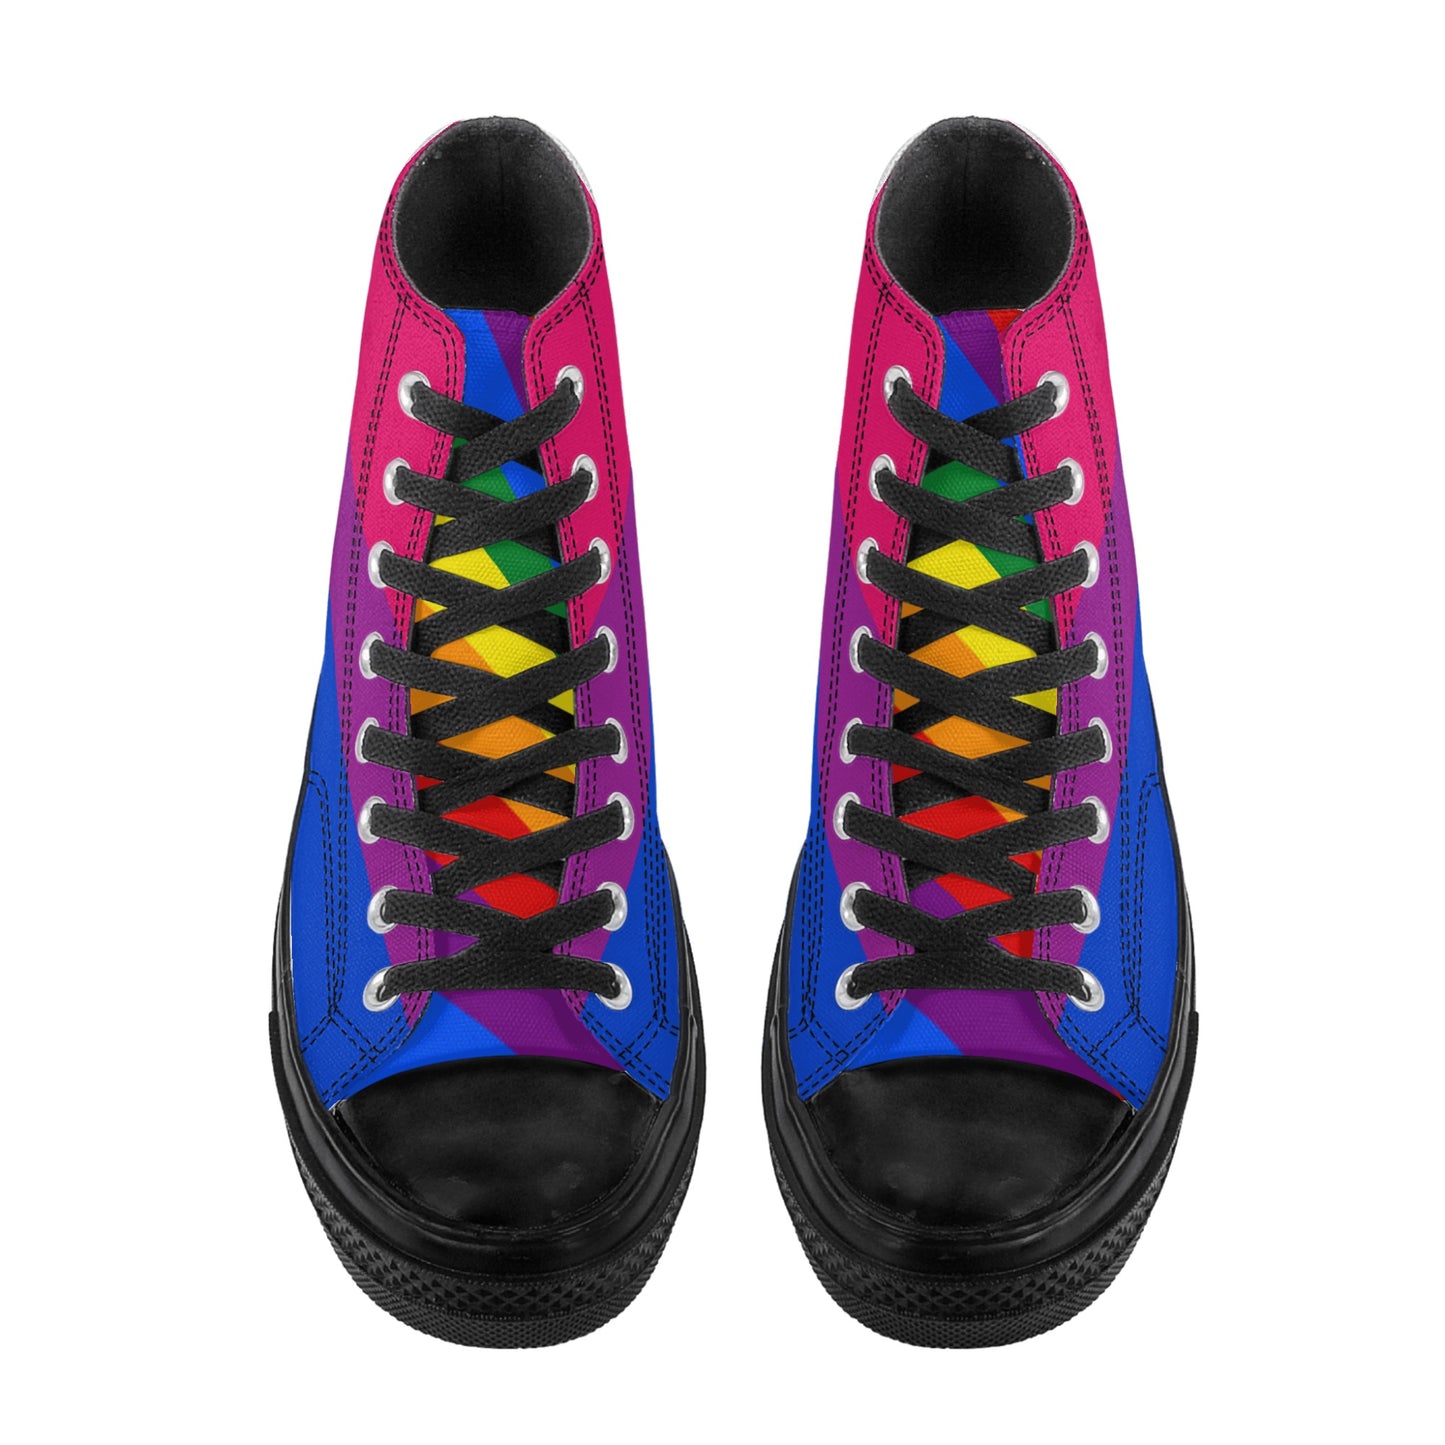 Bisexual Pride Collection - Womens Classic Black High Top Canvas Shoes for the LGBTQIA+ community